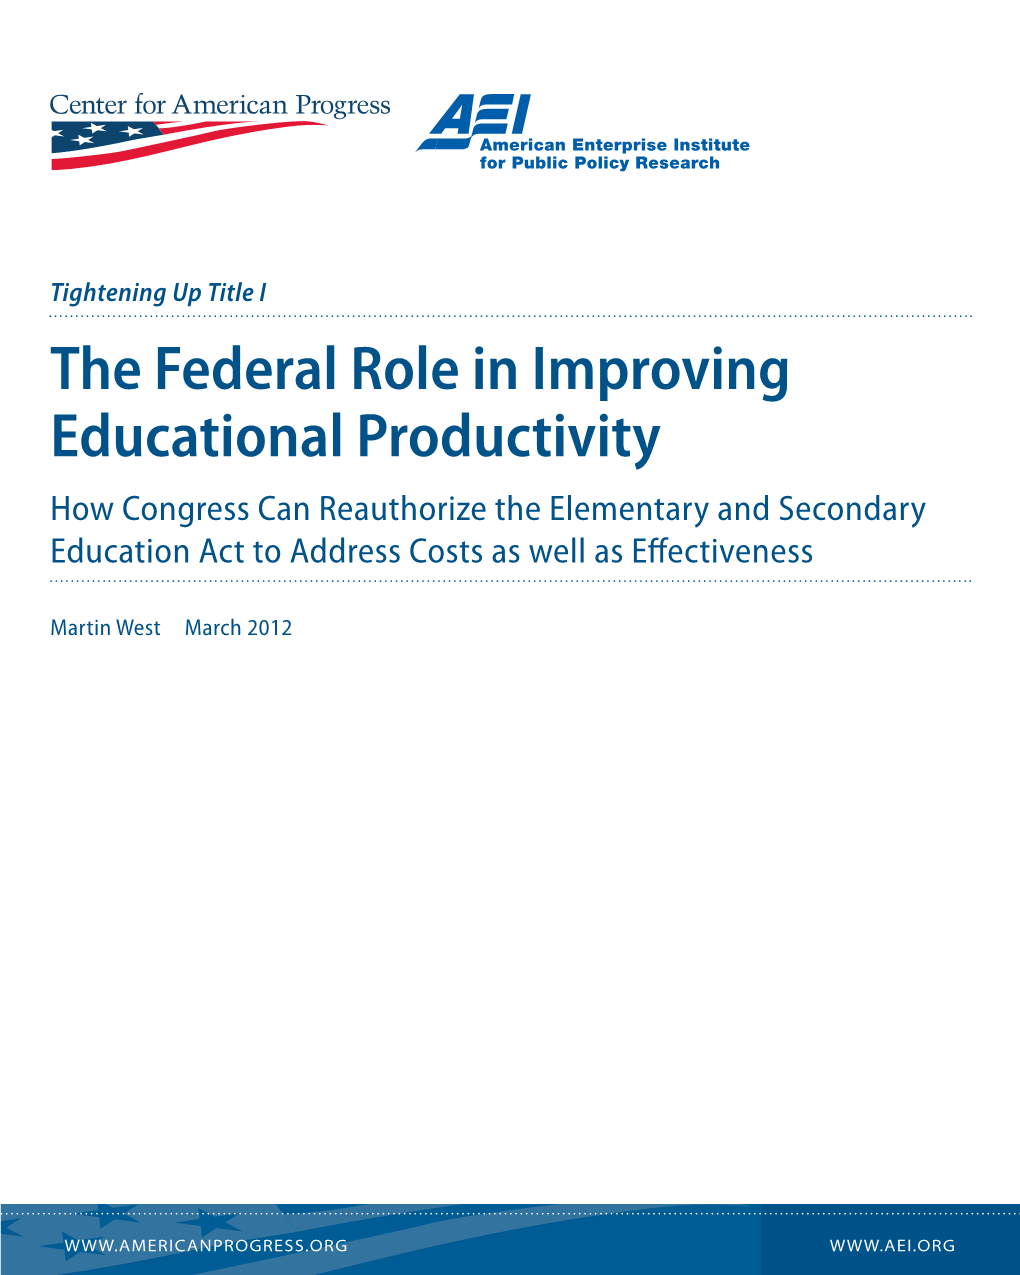 The Federal Role in Improving Educational Productivity